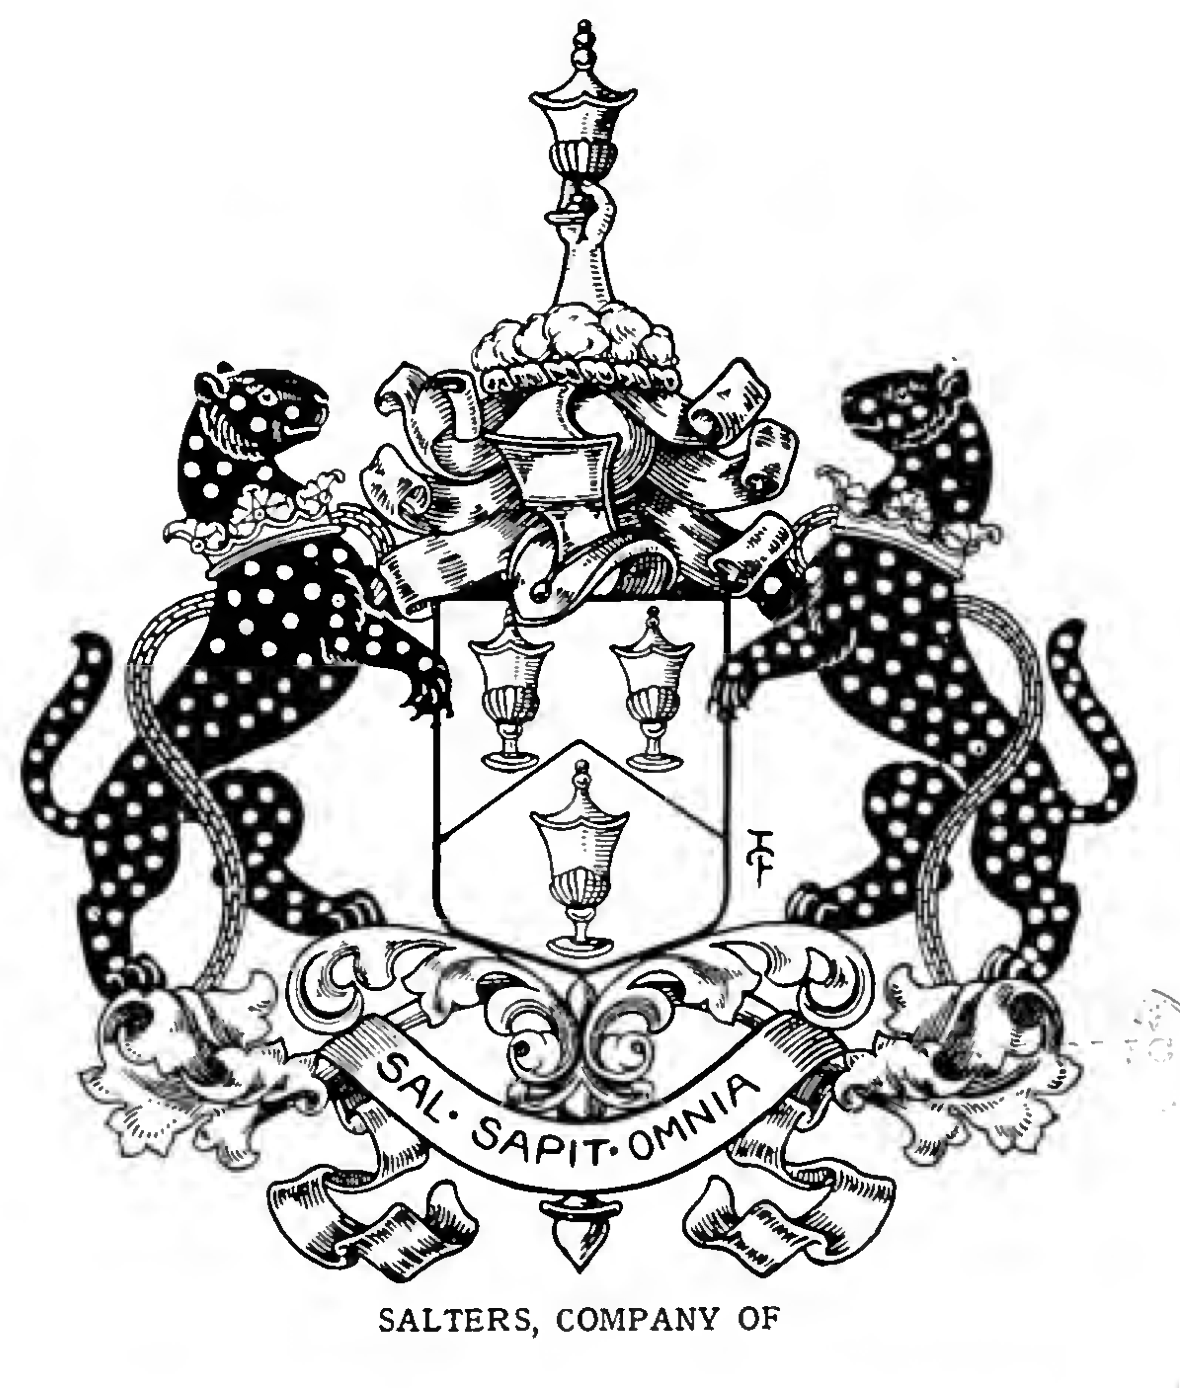 SALTERS, The Worshipful Company of (London).